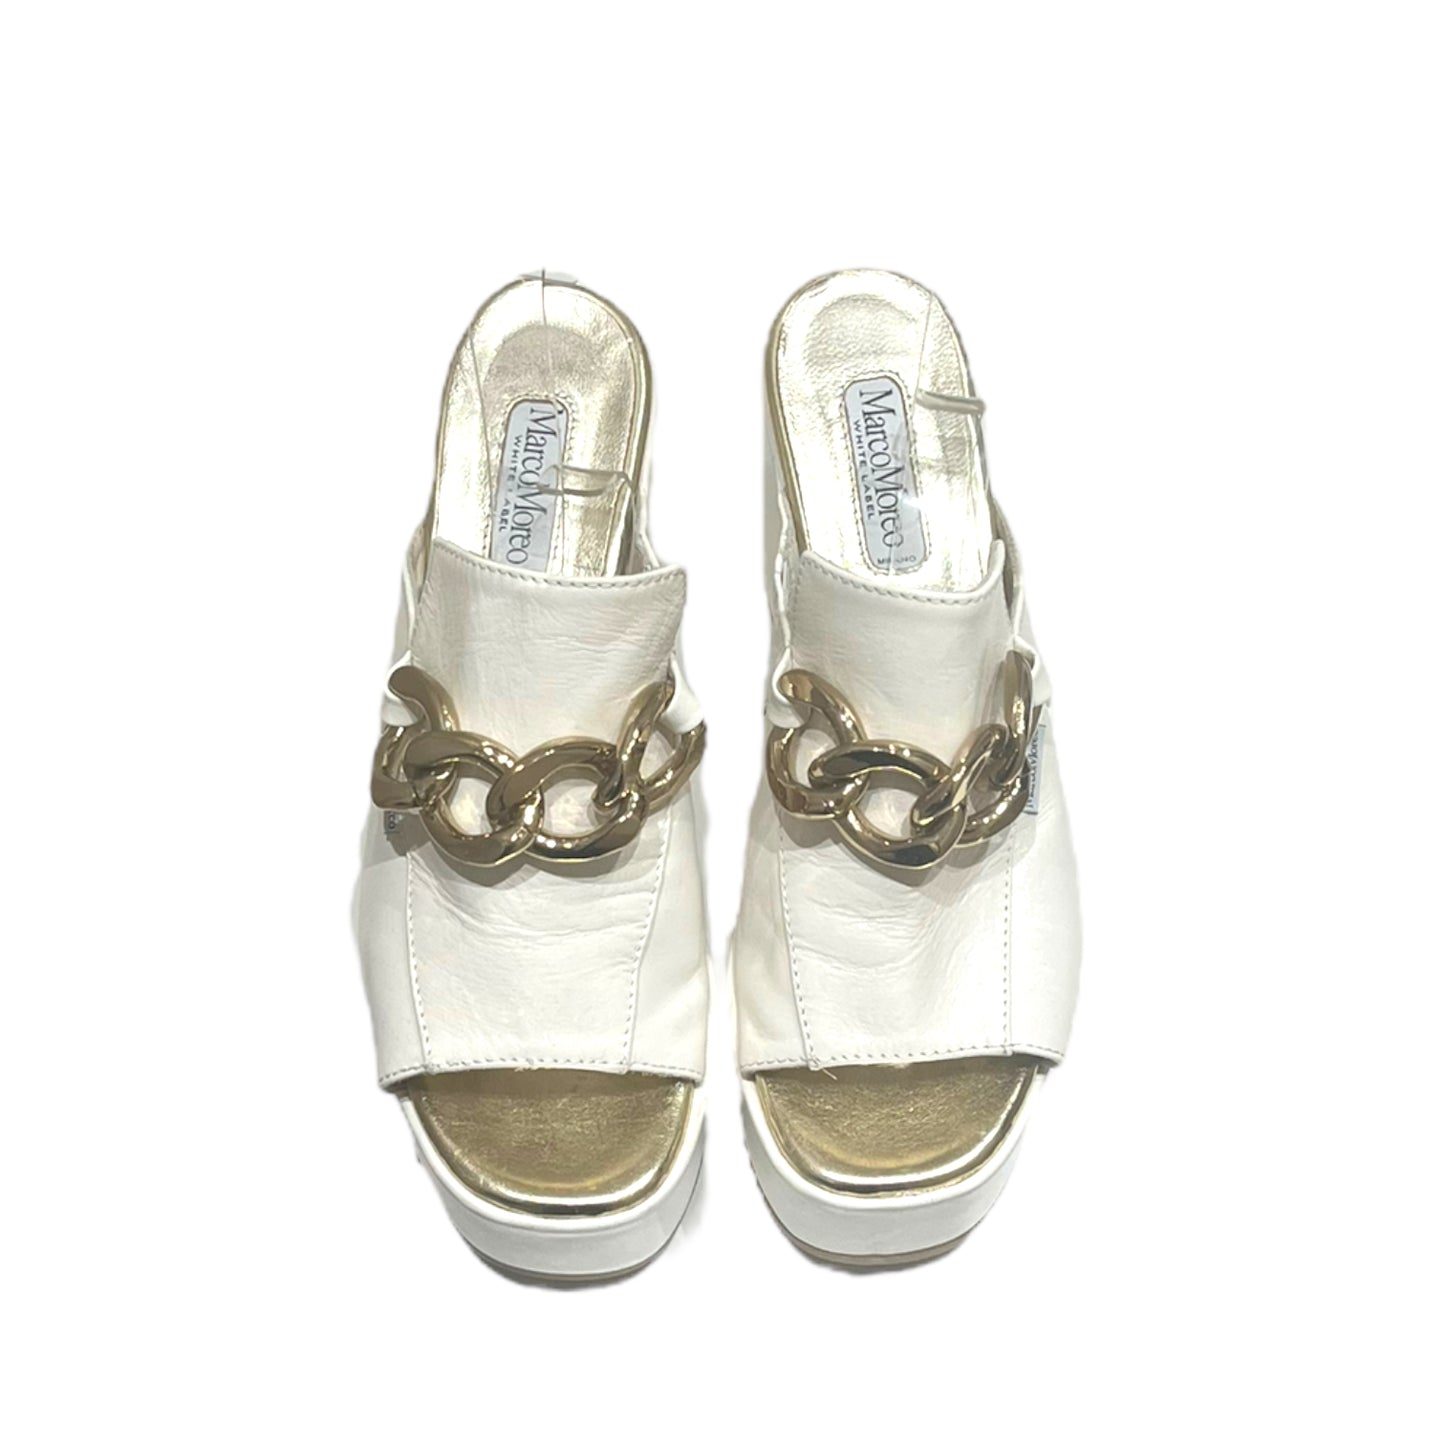 Marco Moreo White and Gold Chain Heels